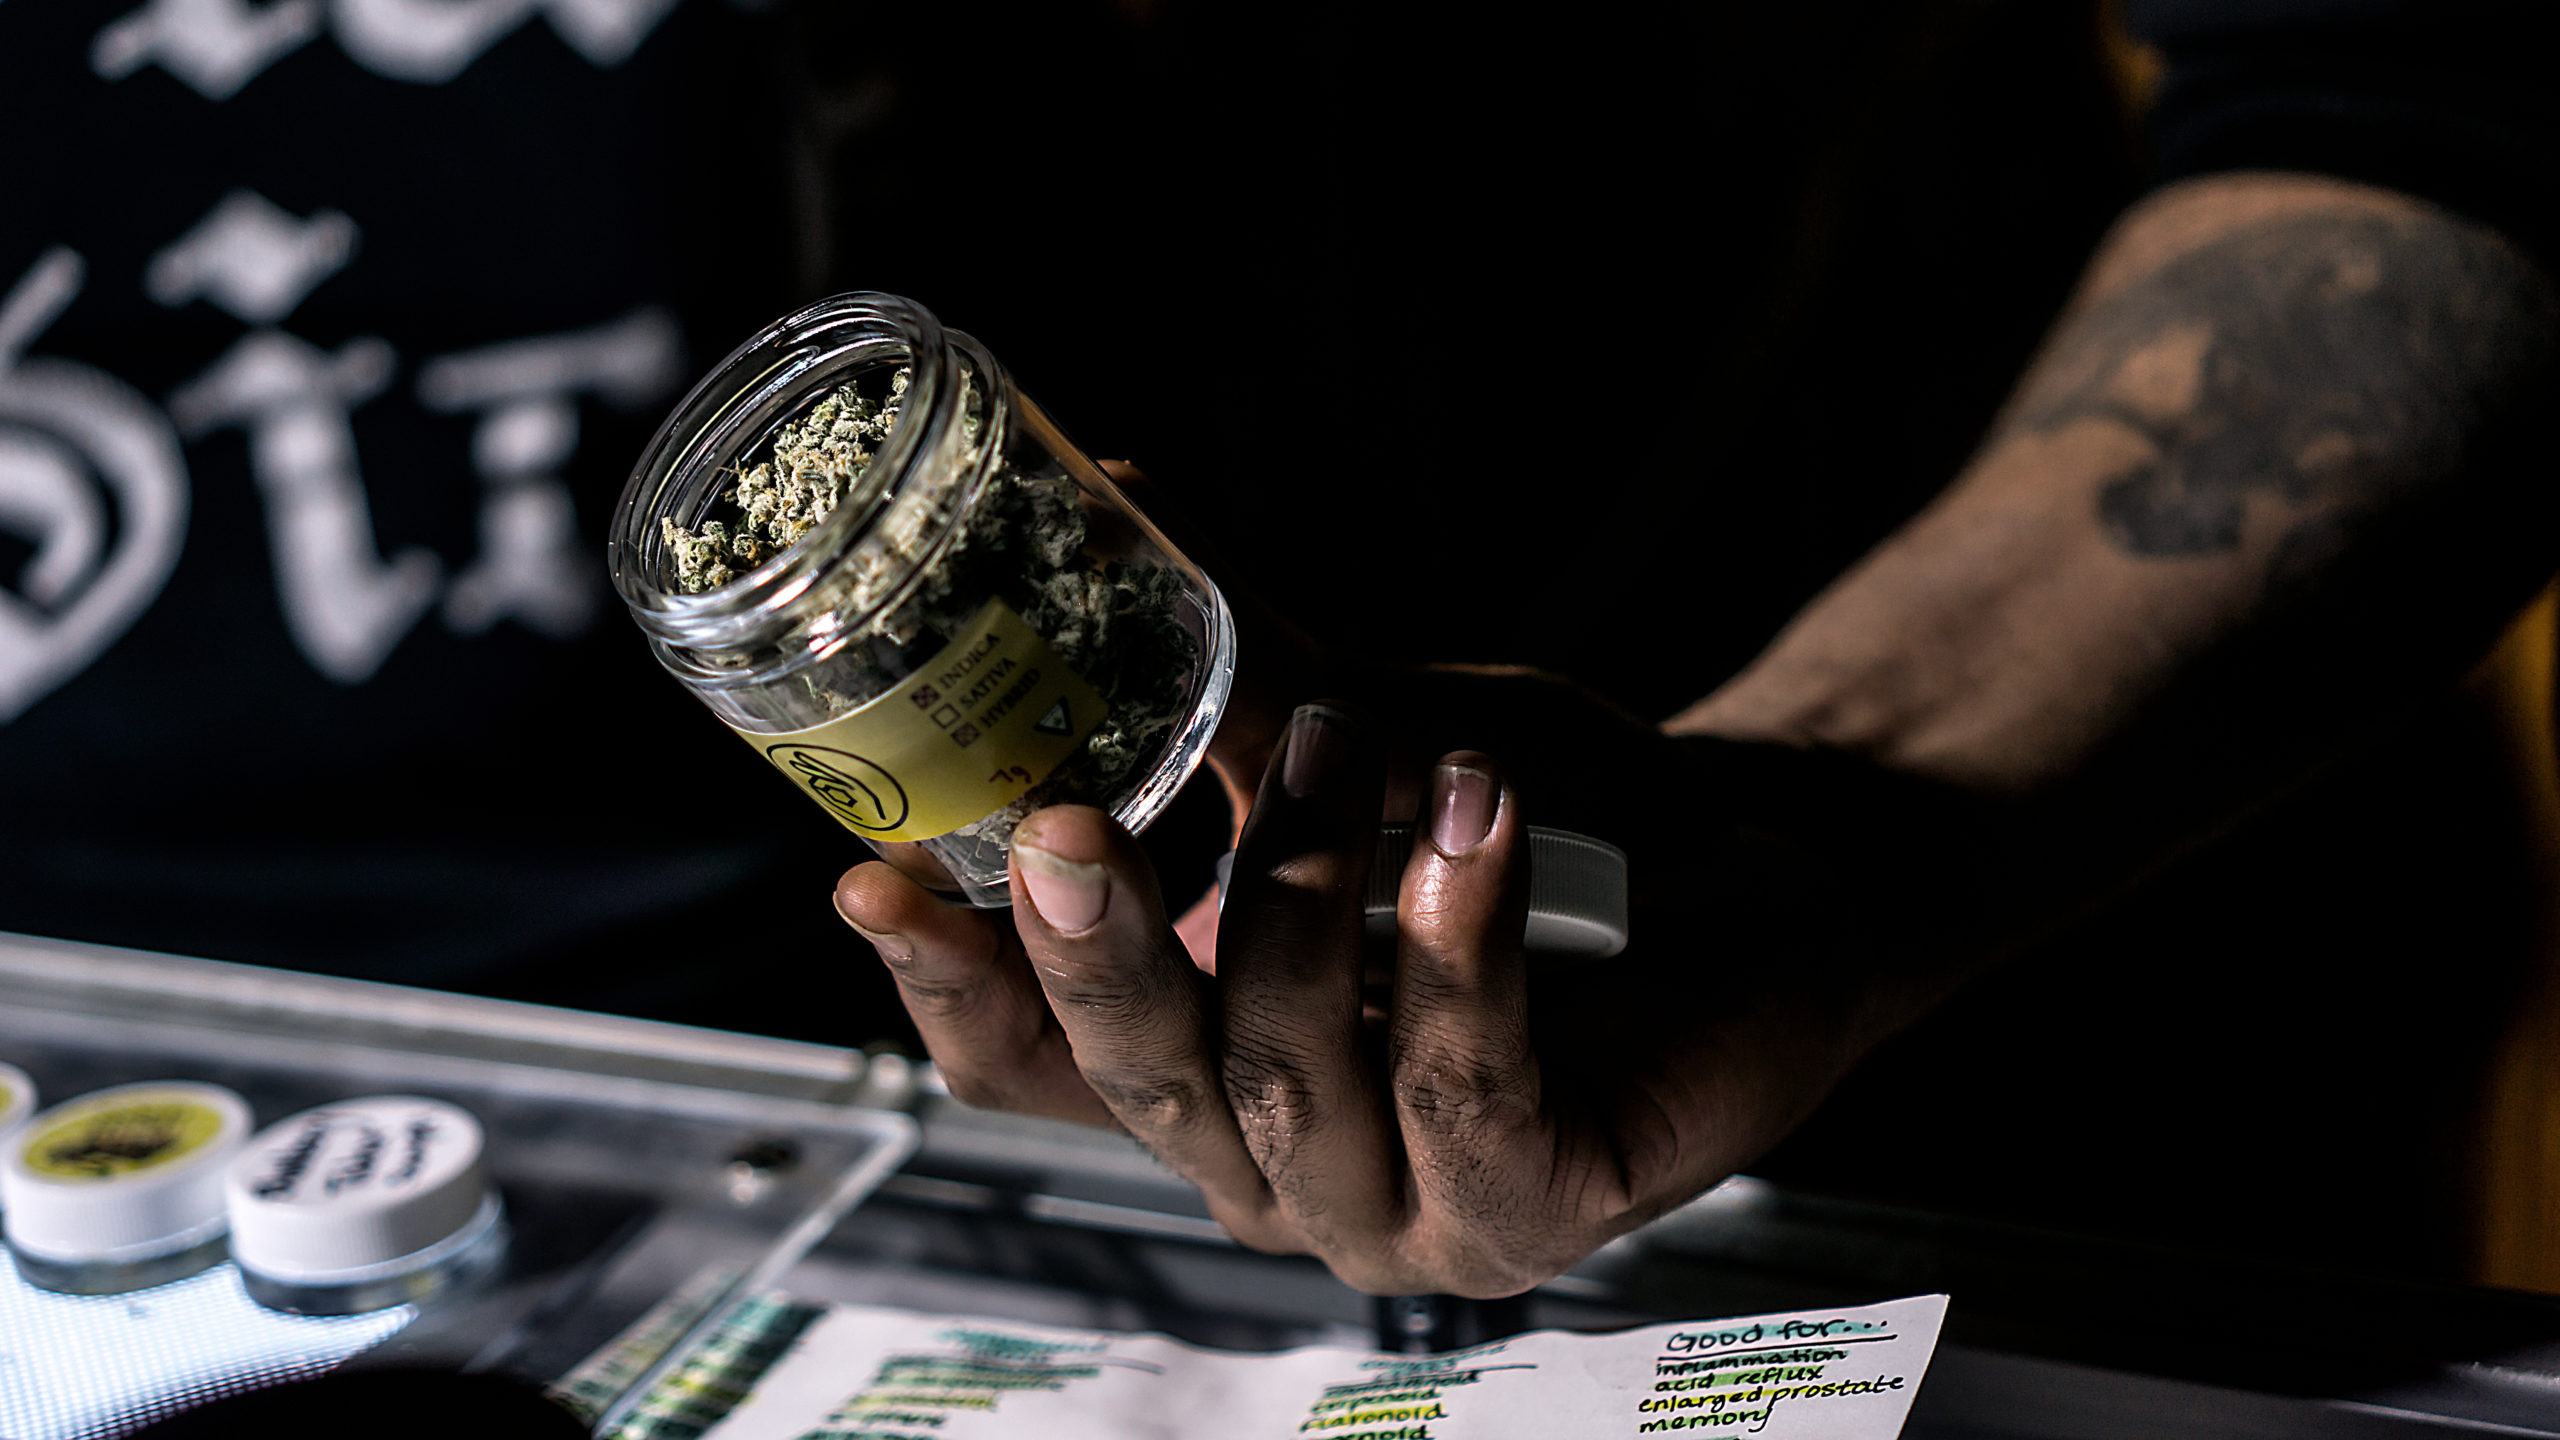 The Best Black-Owned CBD and Cannabis Companies.